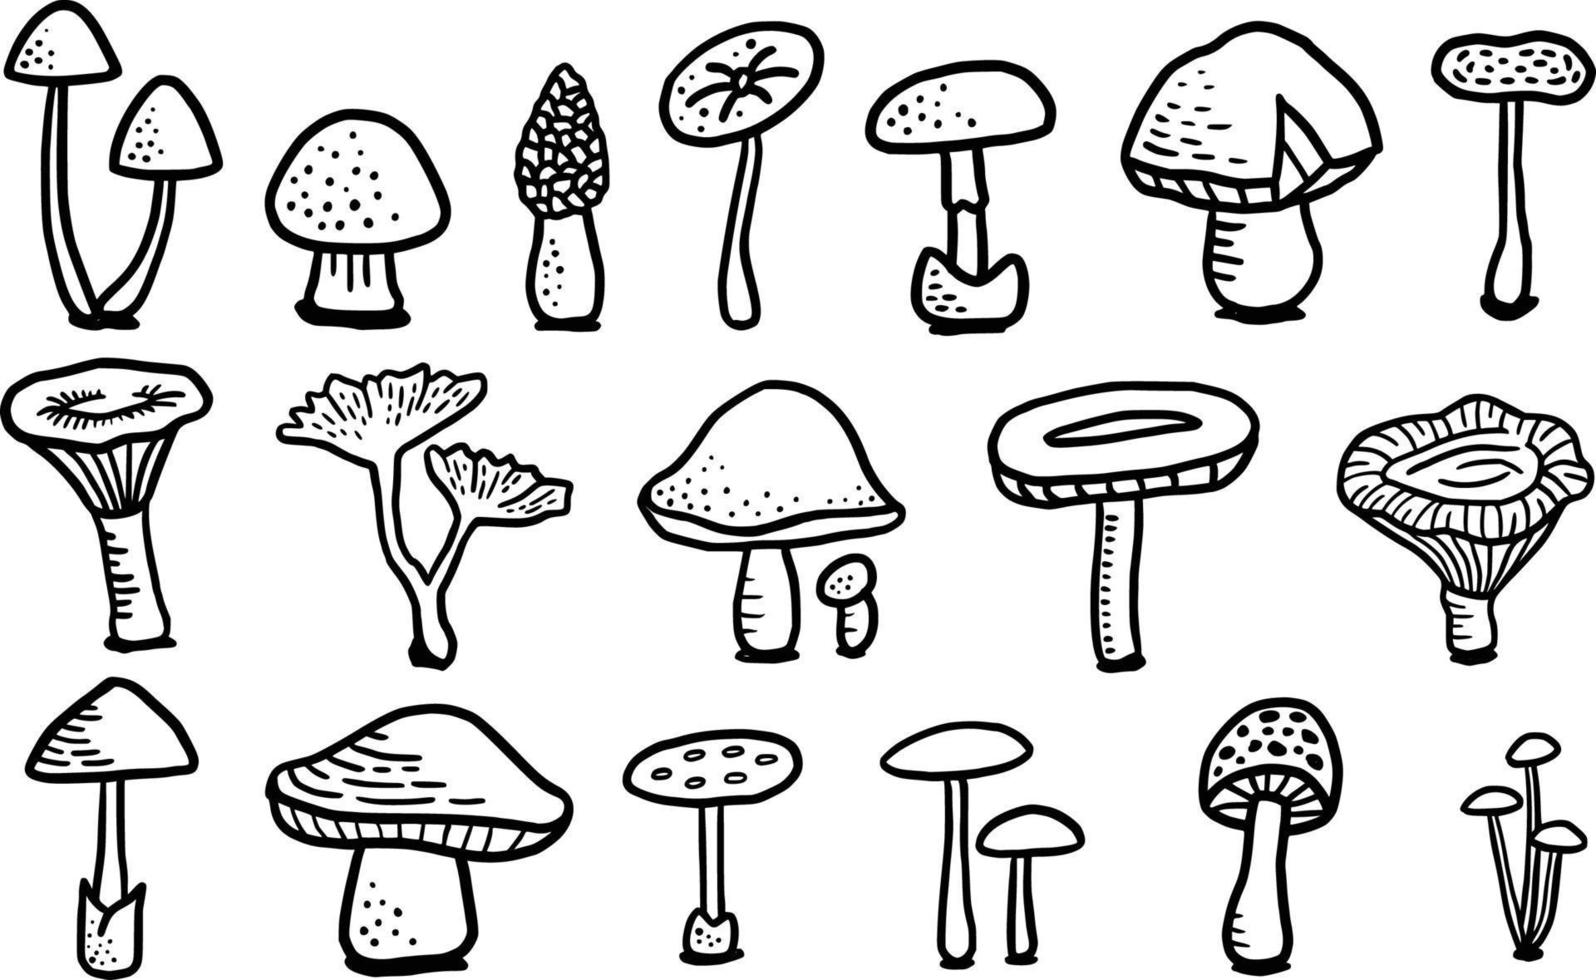 18 Handdrawn Mushroom for Coloring Page vector